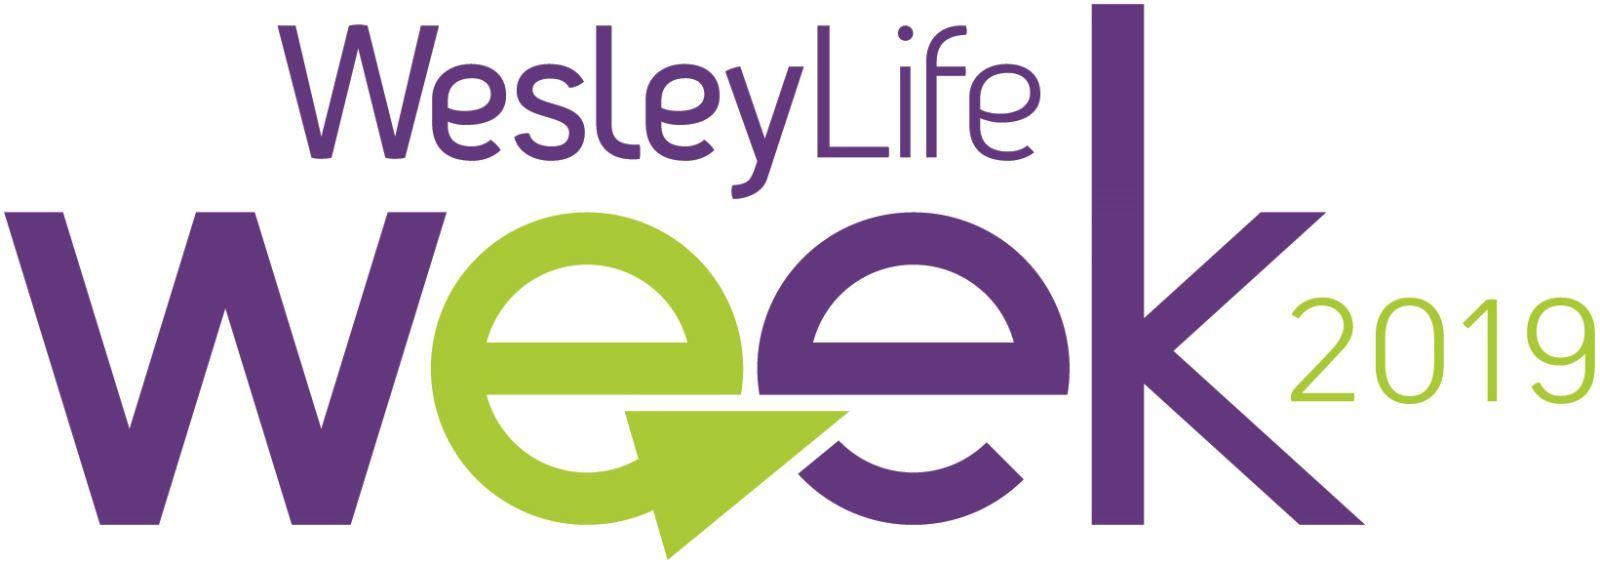 WesleyLife Logo - Adult Healthcare Services & Wellness Networks in Iowa